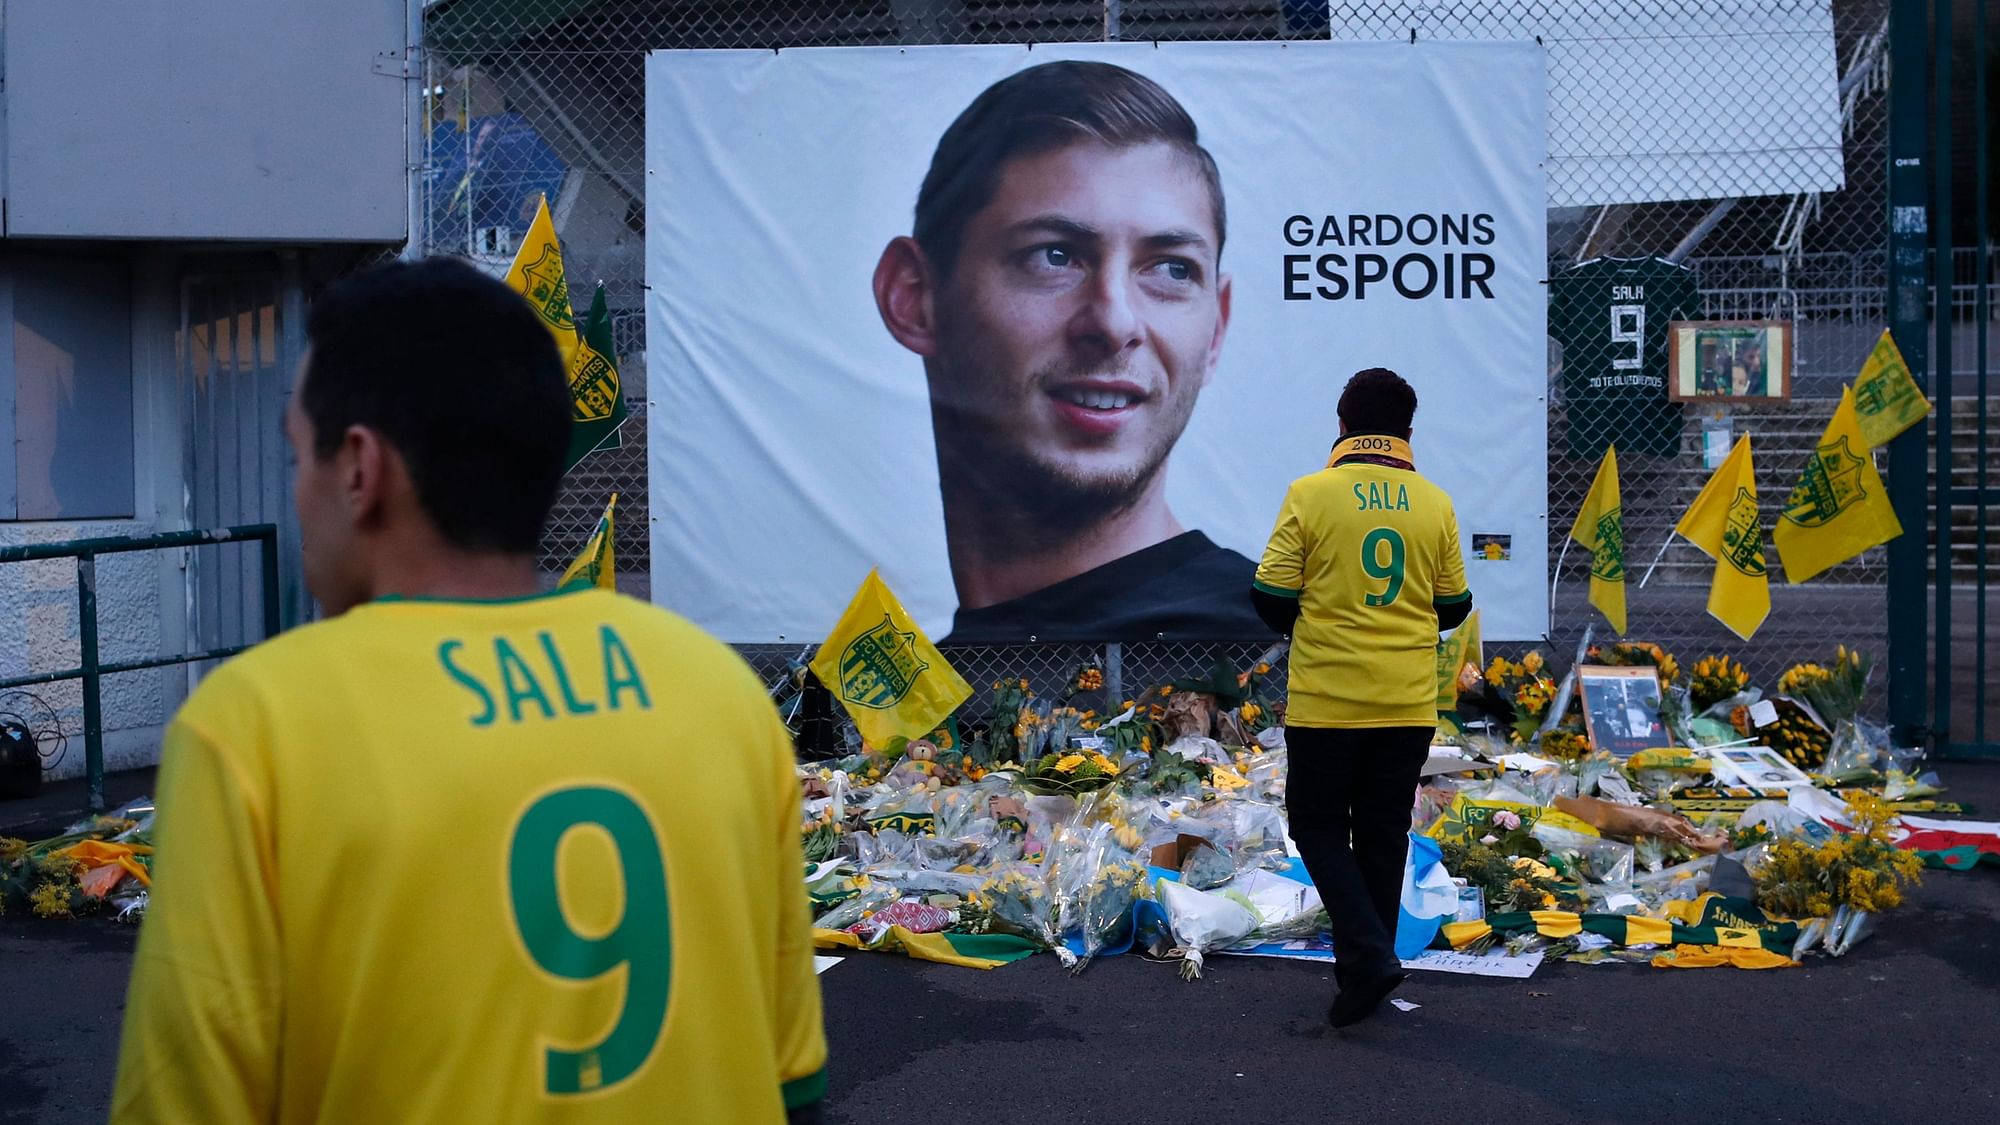 Argentine striker Emiliano Sala died in an airplane crash before playing for the Welsh club.